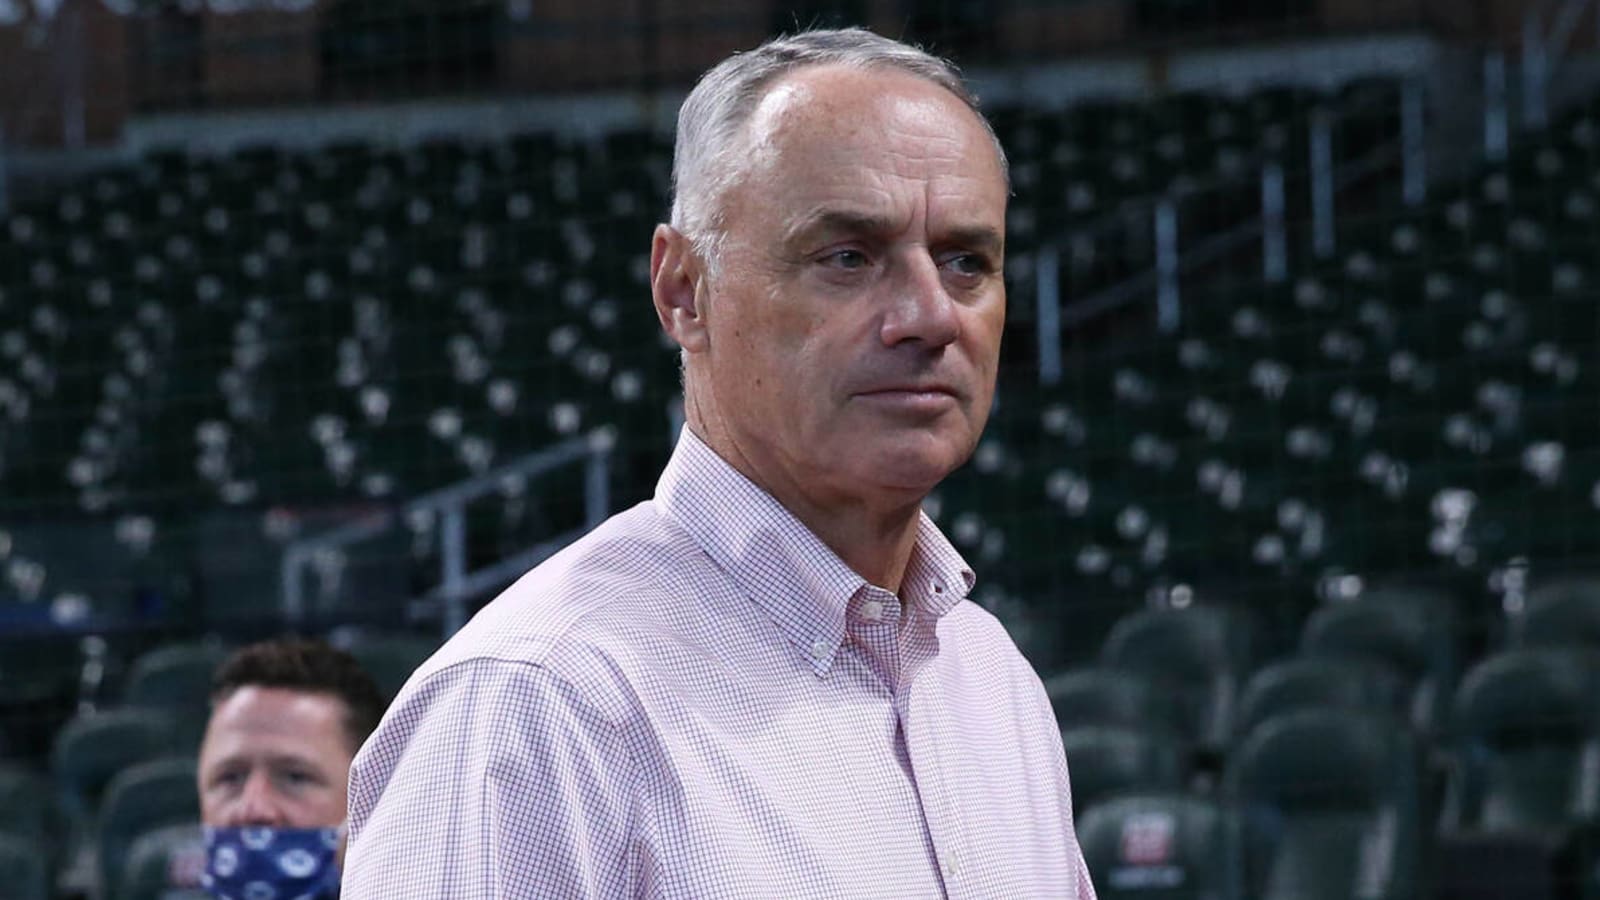 MLBPA 'unimpressed' by league's latest offer in CBA talks